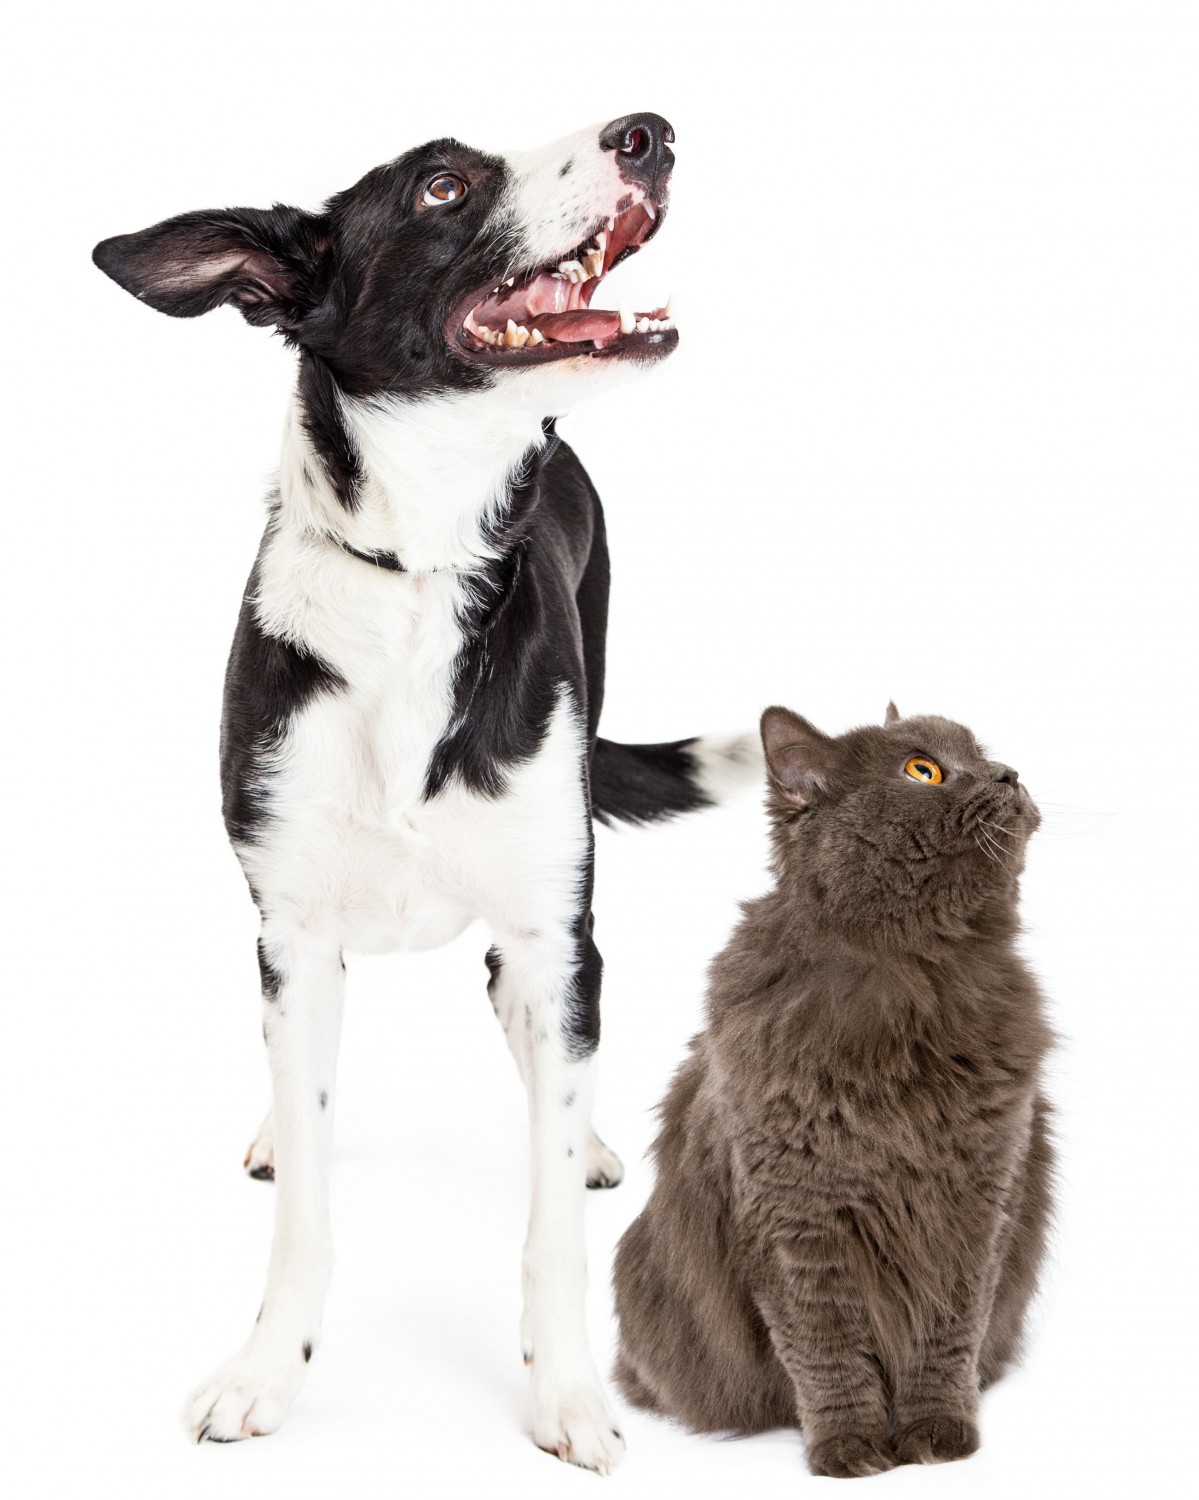 Cat and dog looking